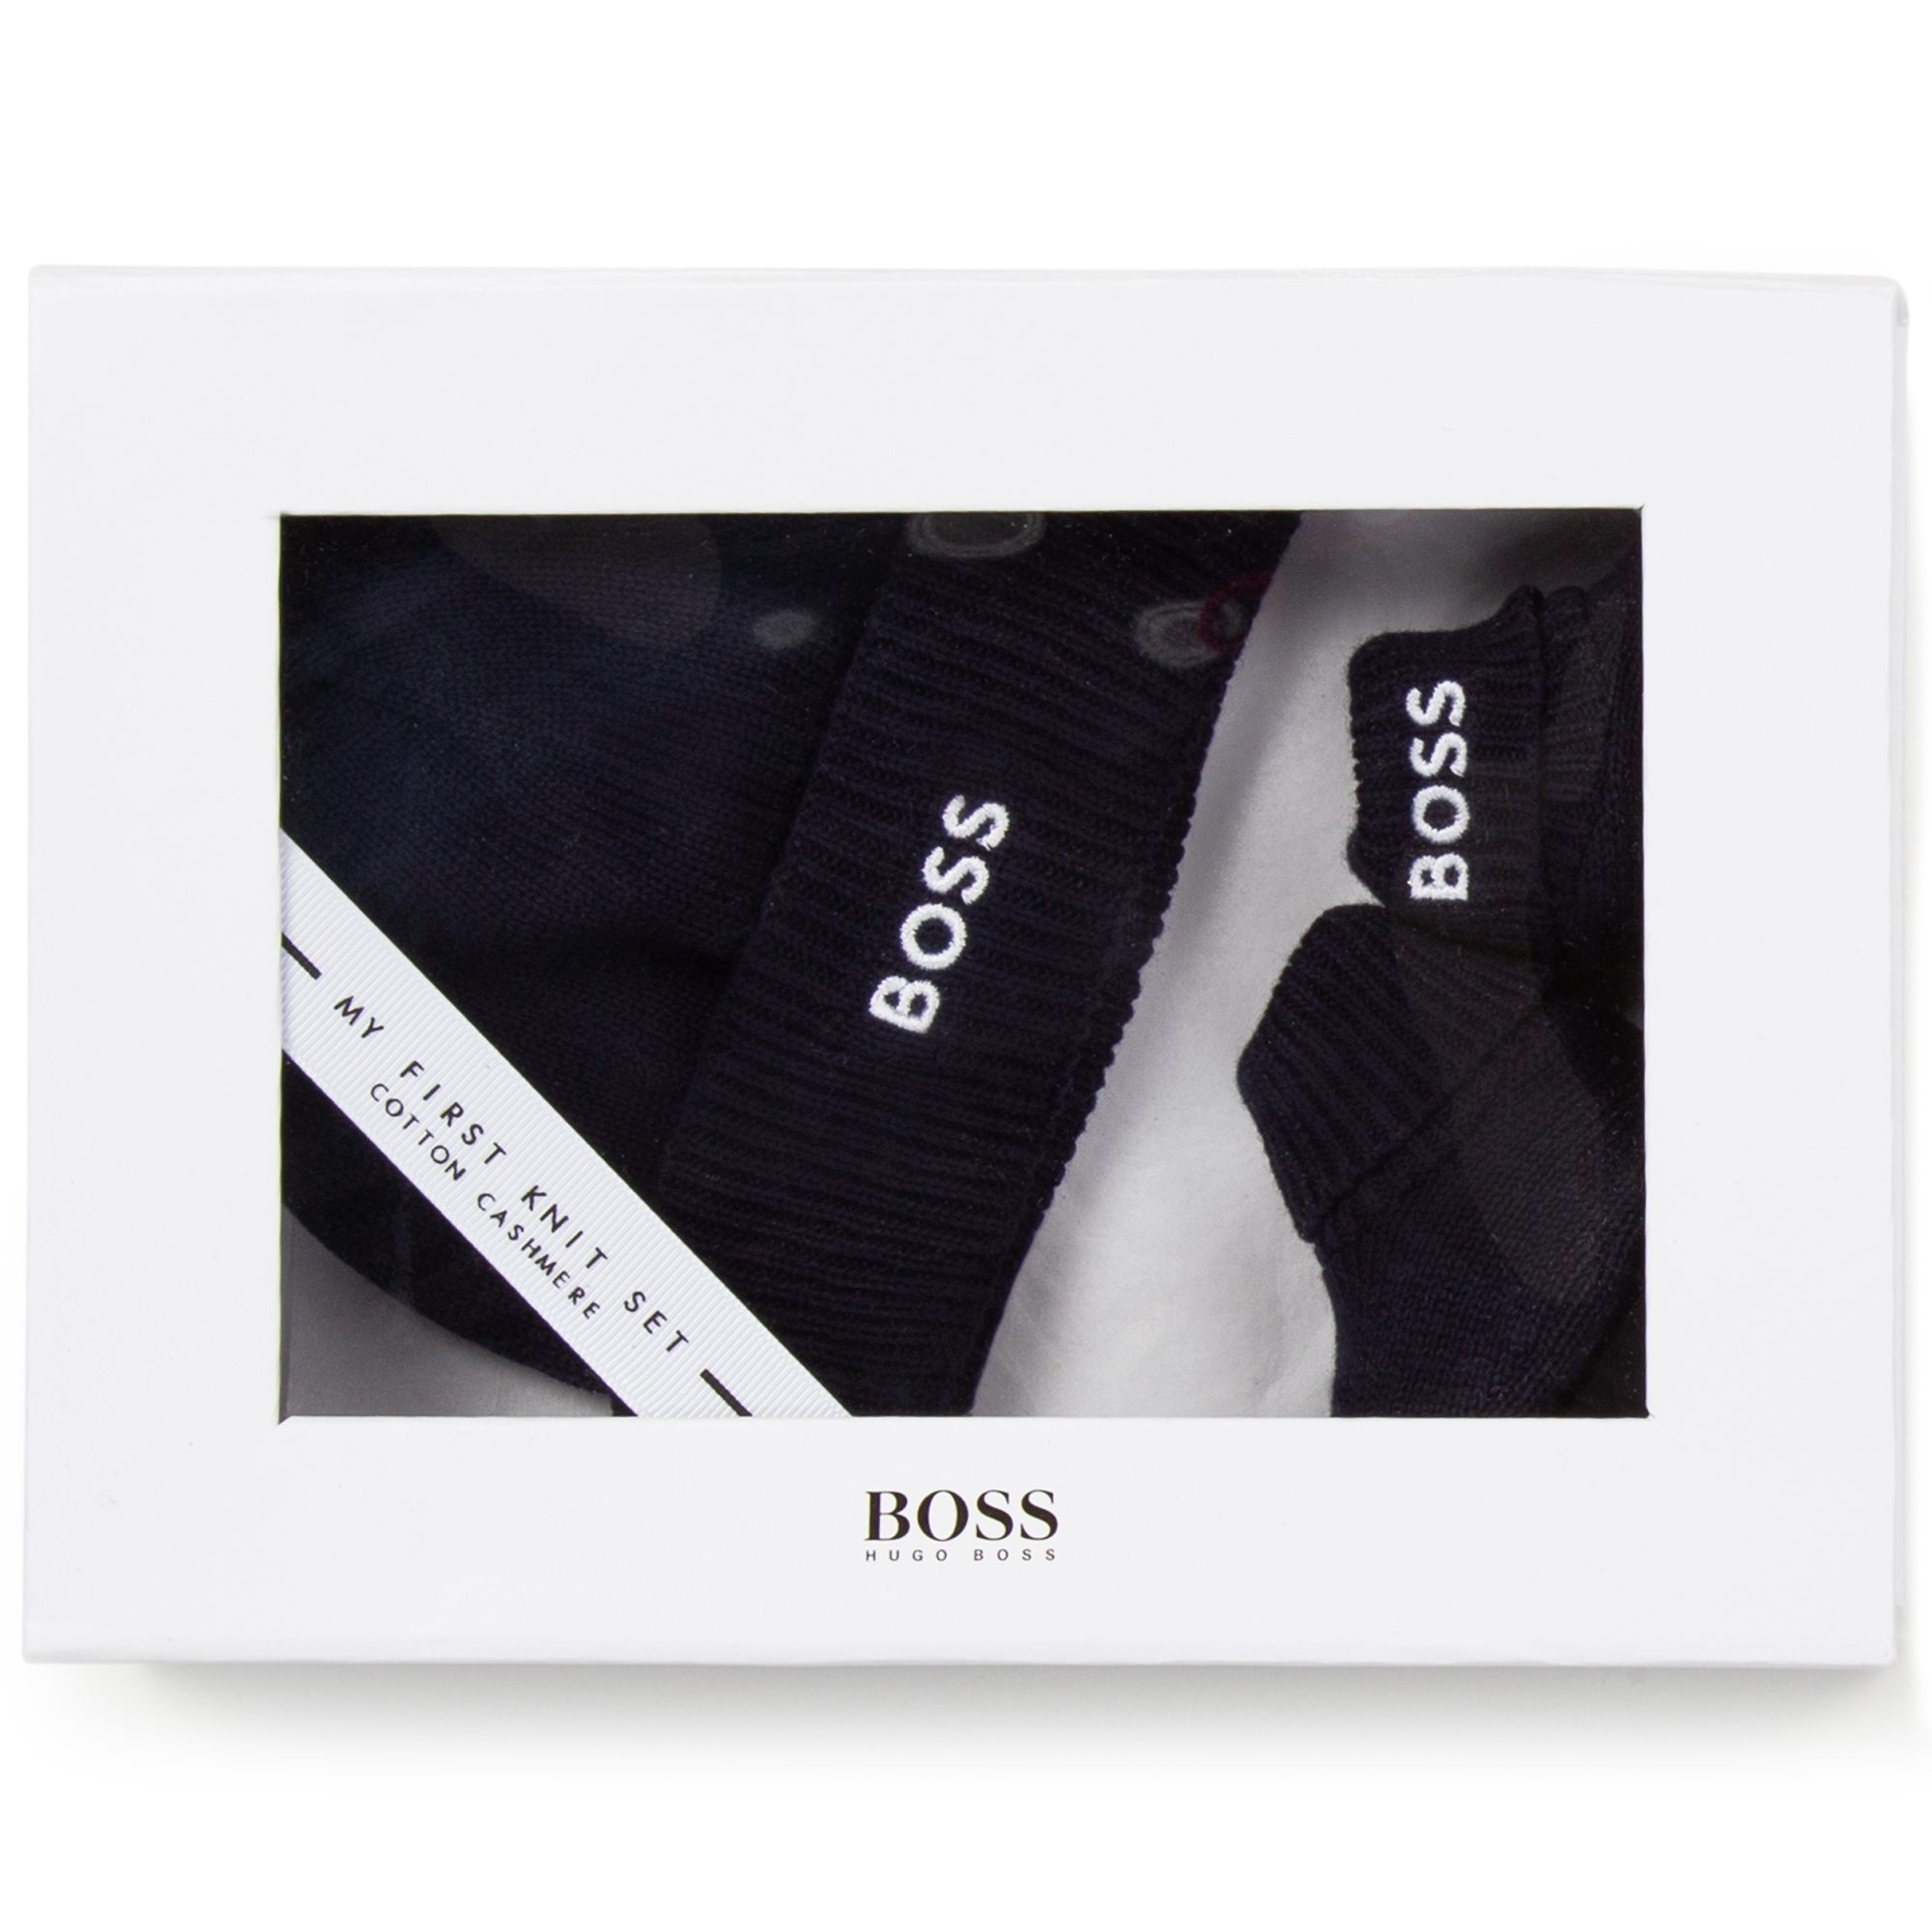 Cap and bootee set BOSS for UNISEX